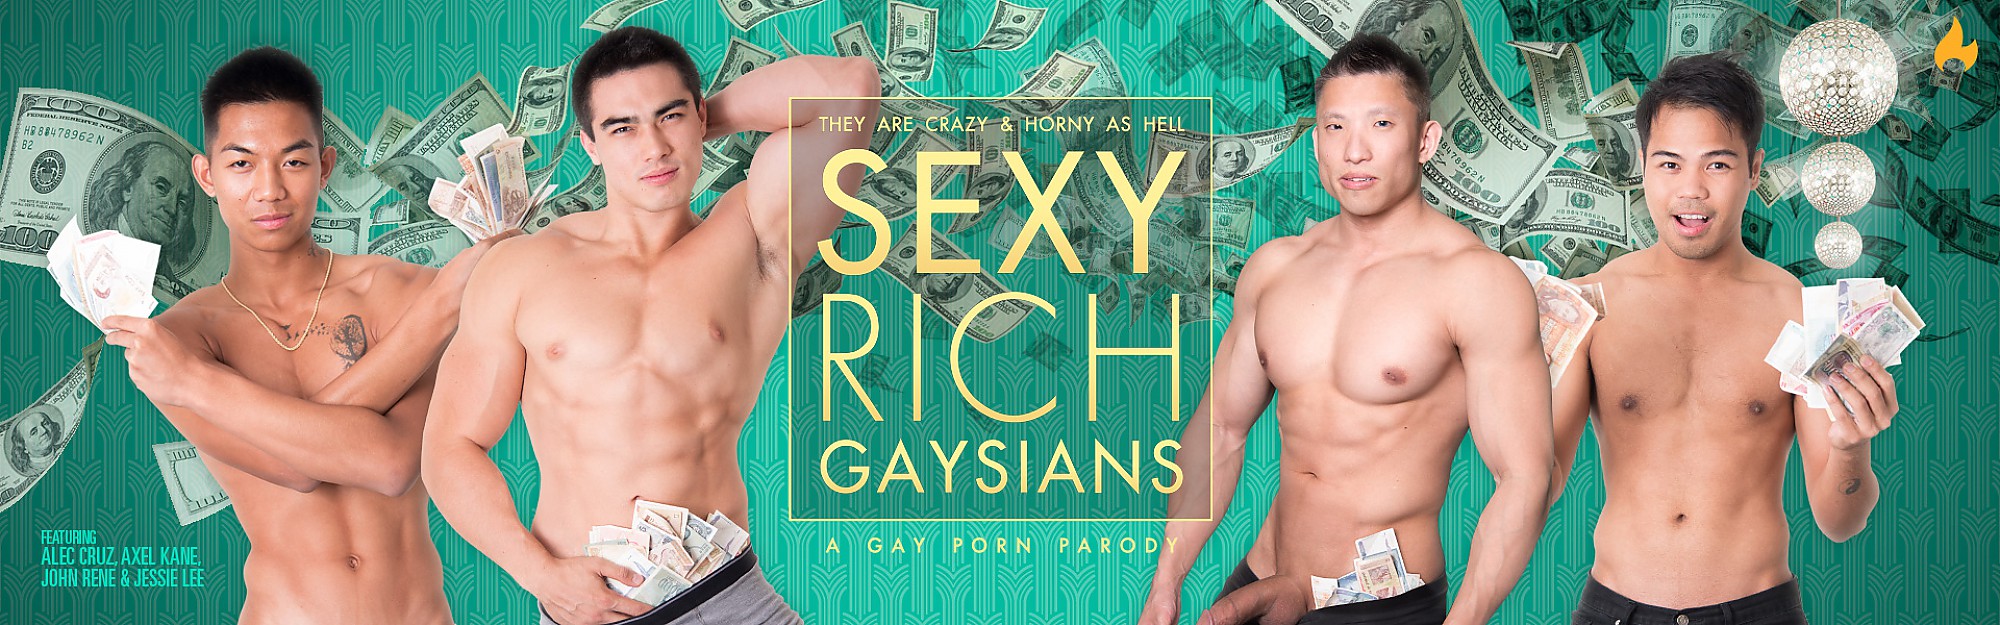 Doodle recommendet gaysians sexy finale asian rich